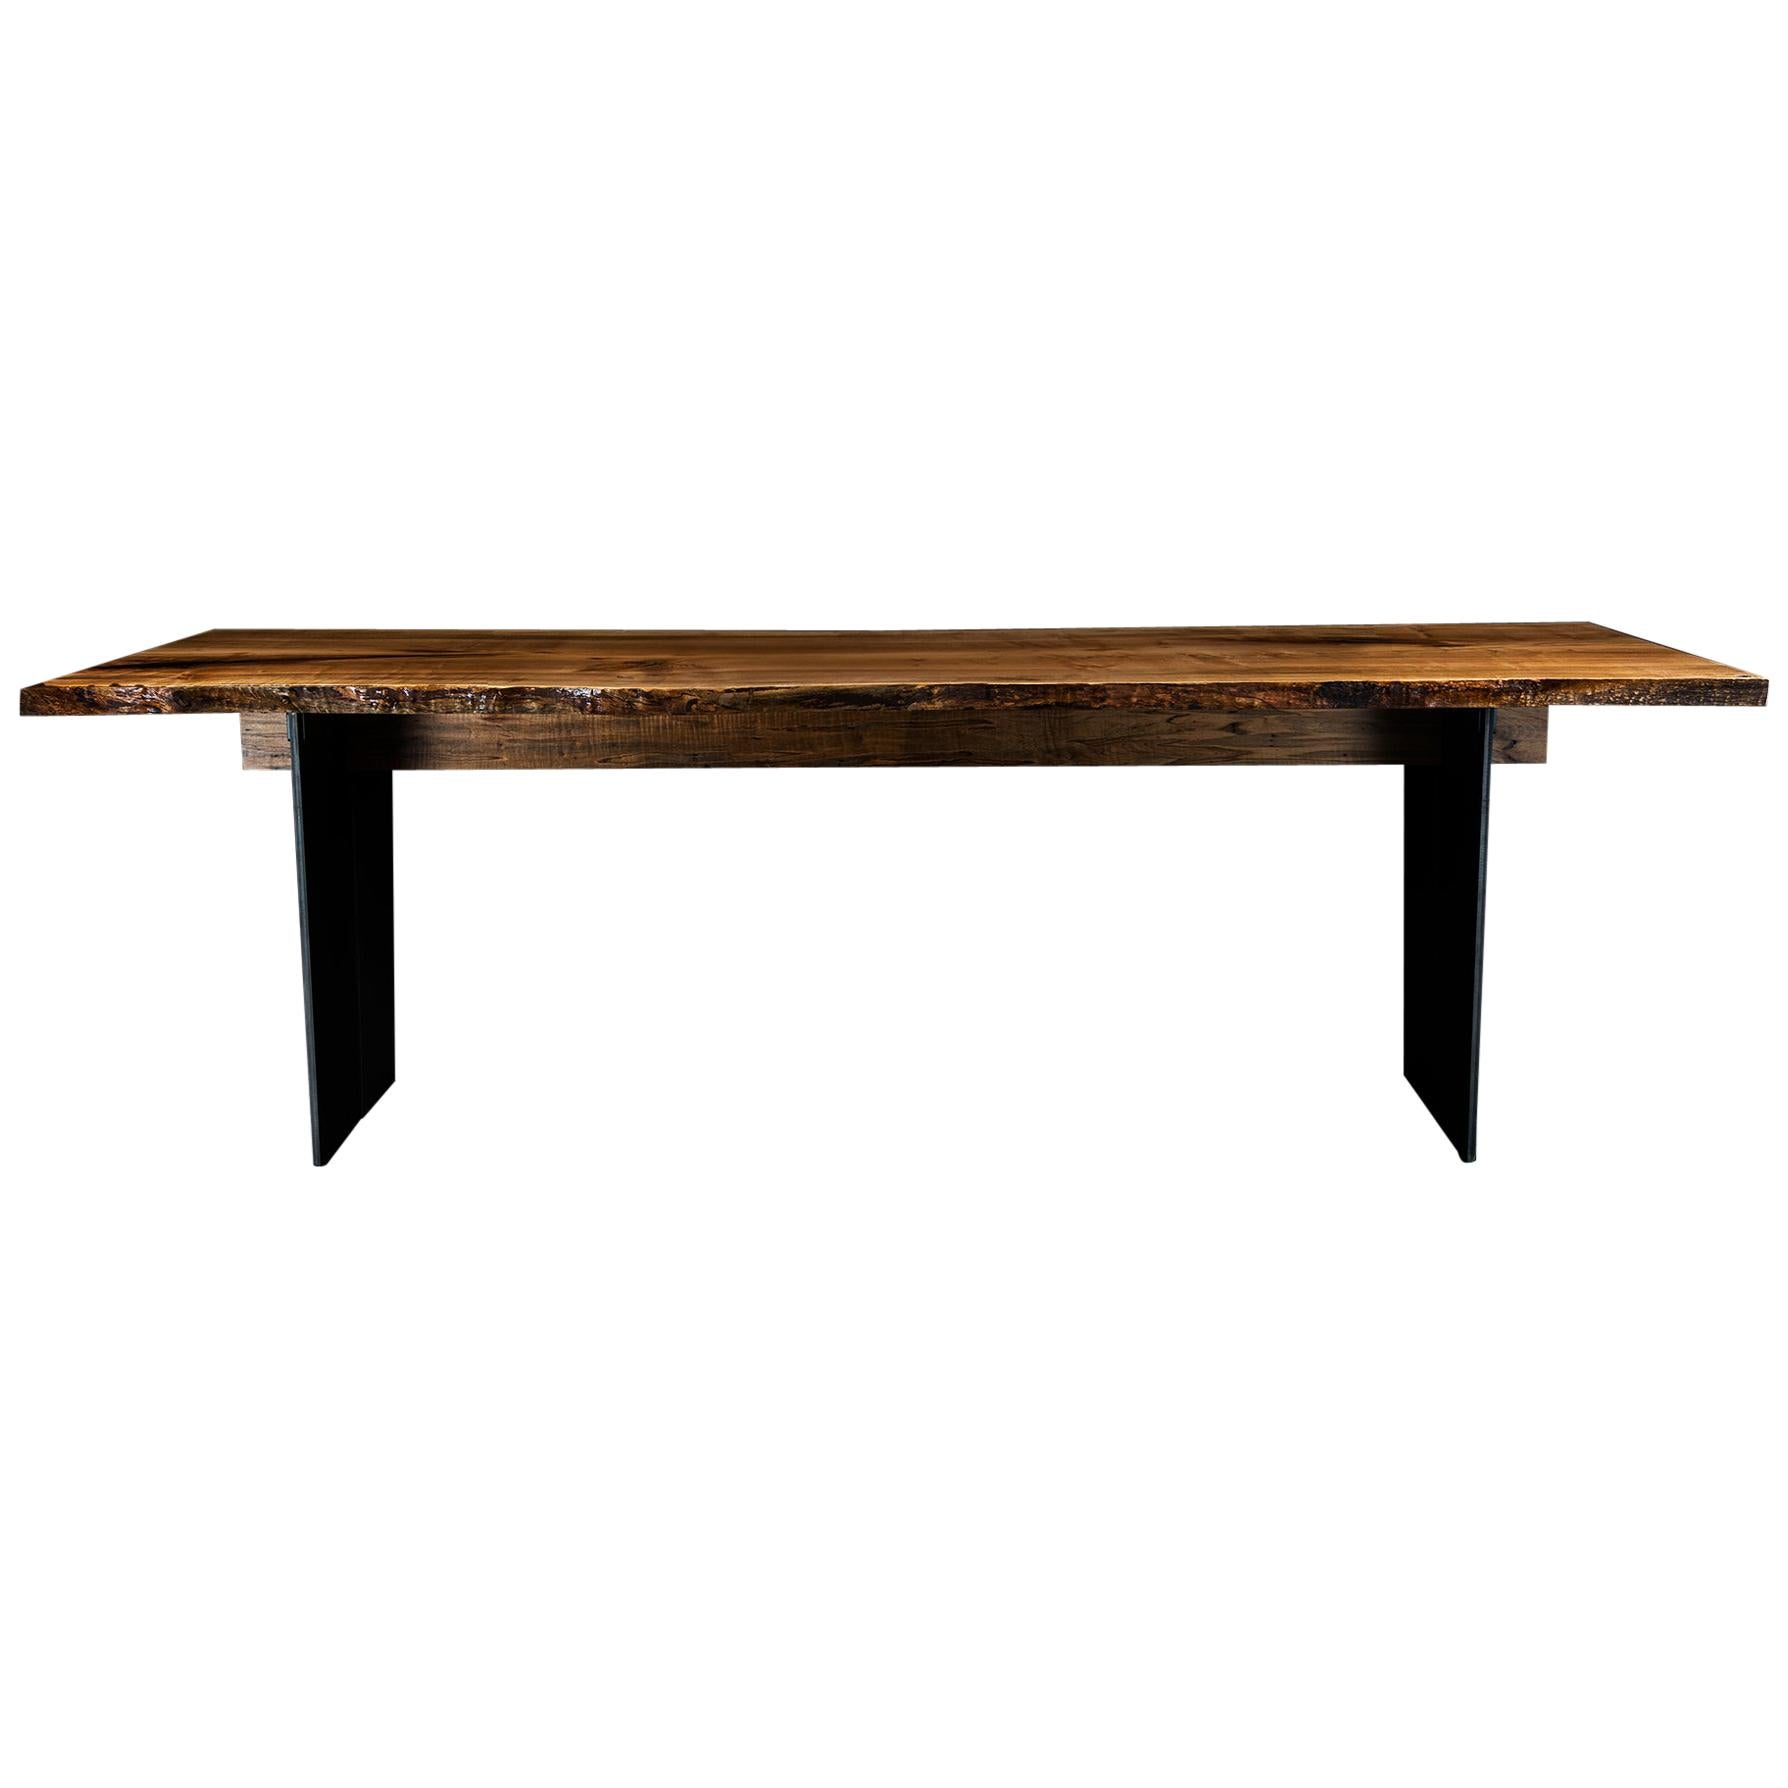 Cadelon Dining Table, by Ambrozia, Silver Maple Slab, Hand-Blackened Steel Base